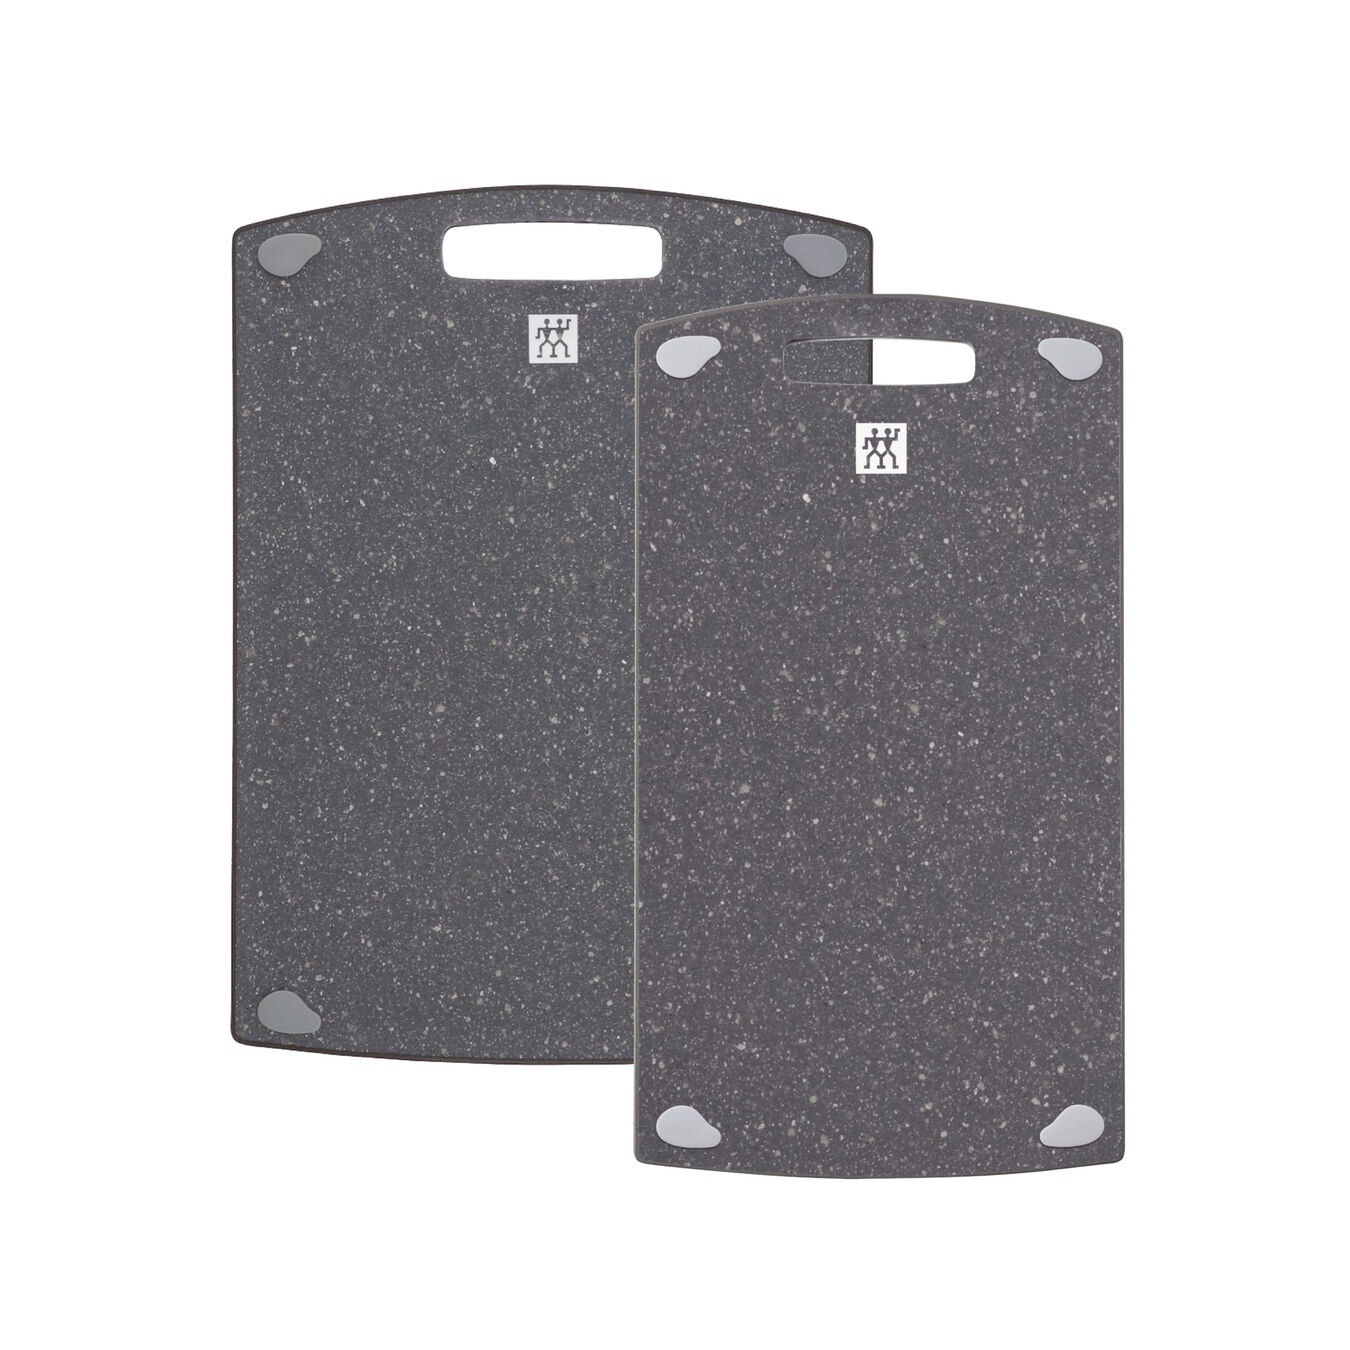 MARBLE SPECKLED BOARD SET 2 Piece, plastic,,large 2